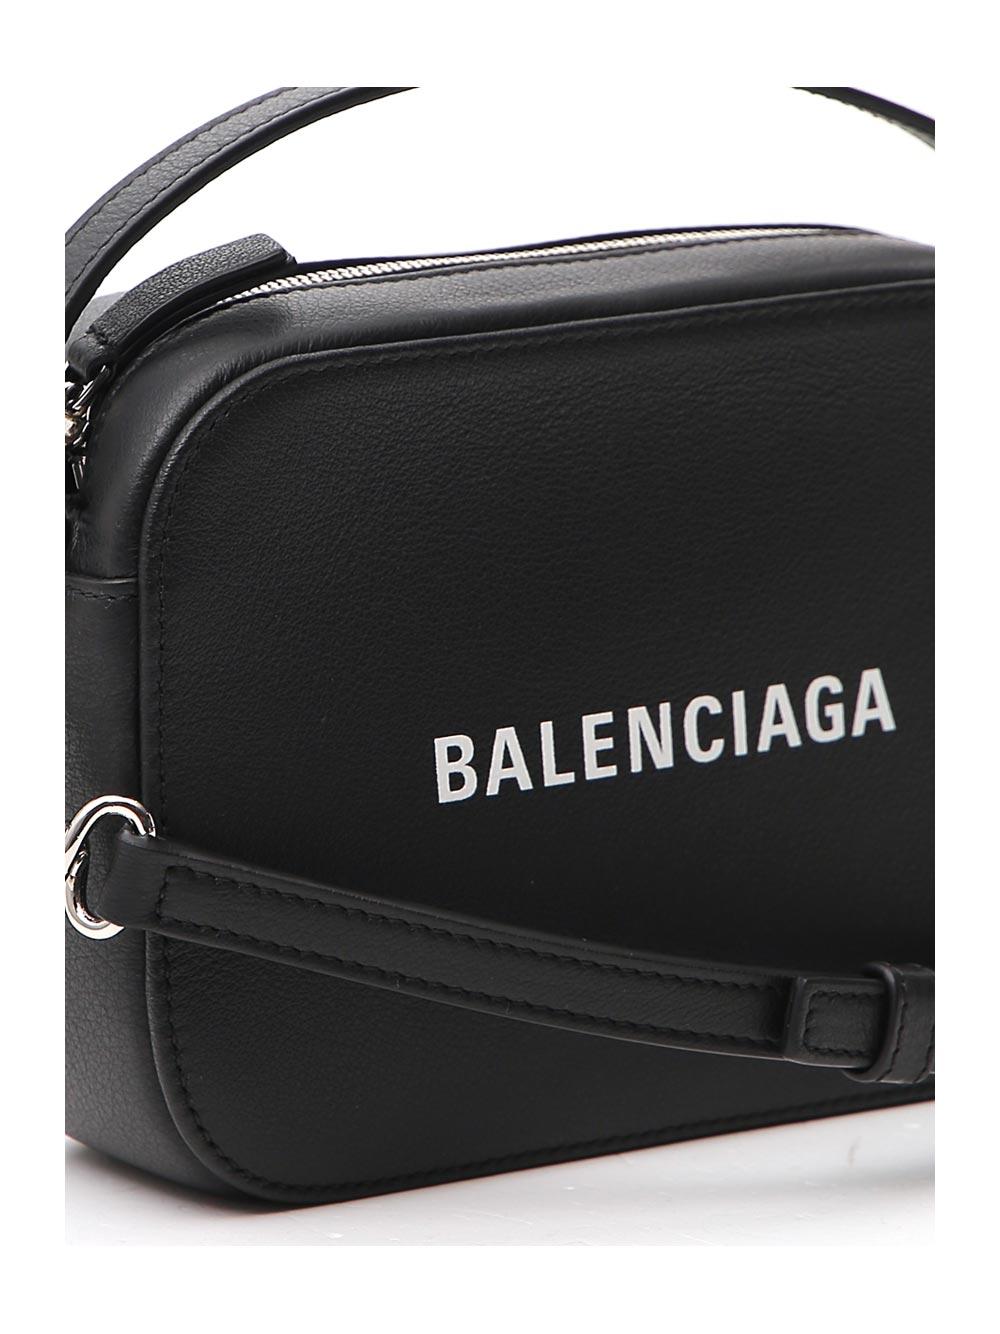 Factory Directly Sale Balenciagas Crossbags Luxury Ladies Handbags  Designer Shoulder Bags Balenciagas Fashion Replica Handbag  China  Designer Bags and Fashion Bags price  MadeinChinacom